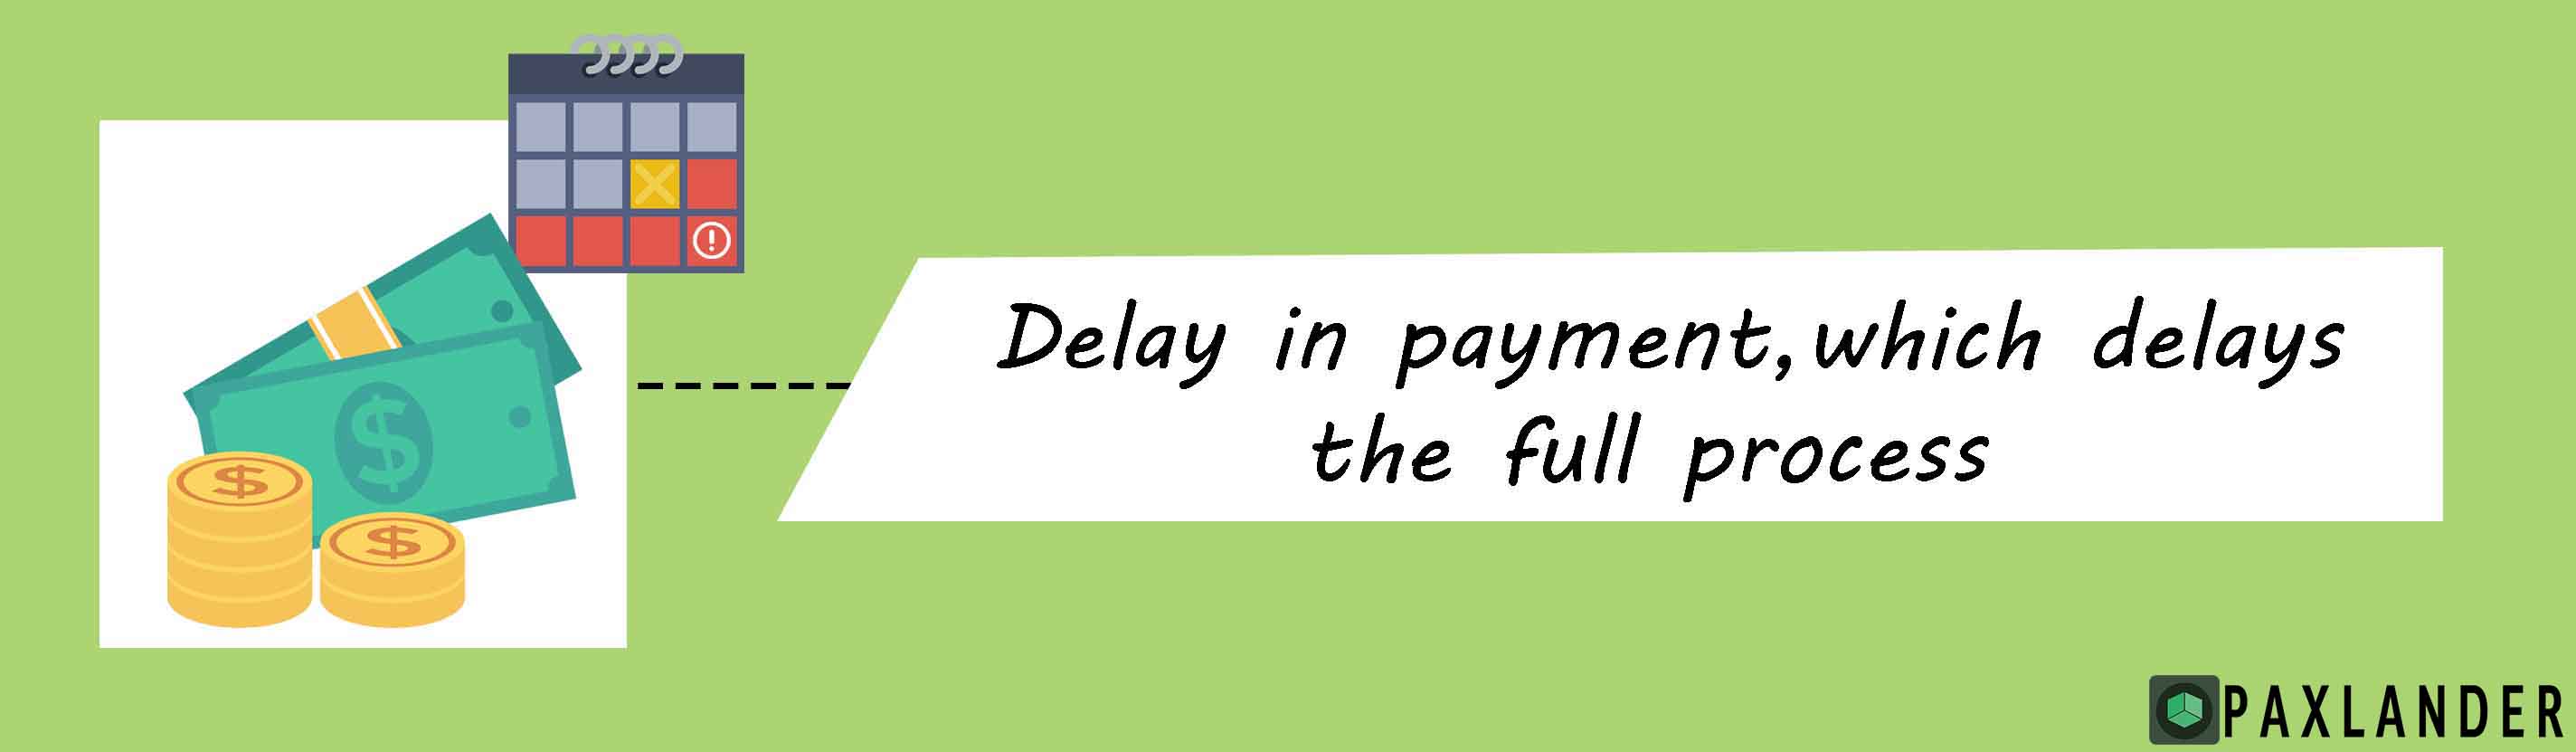 Payment is delayed